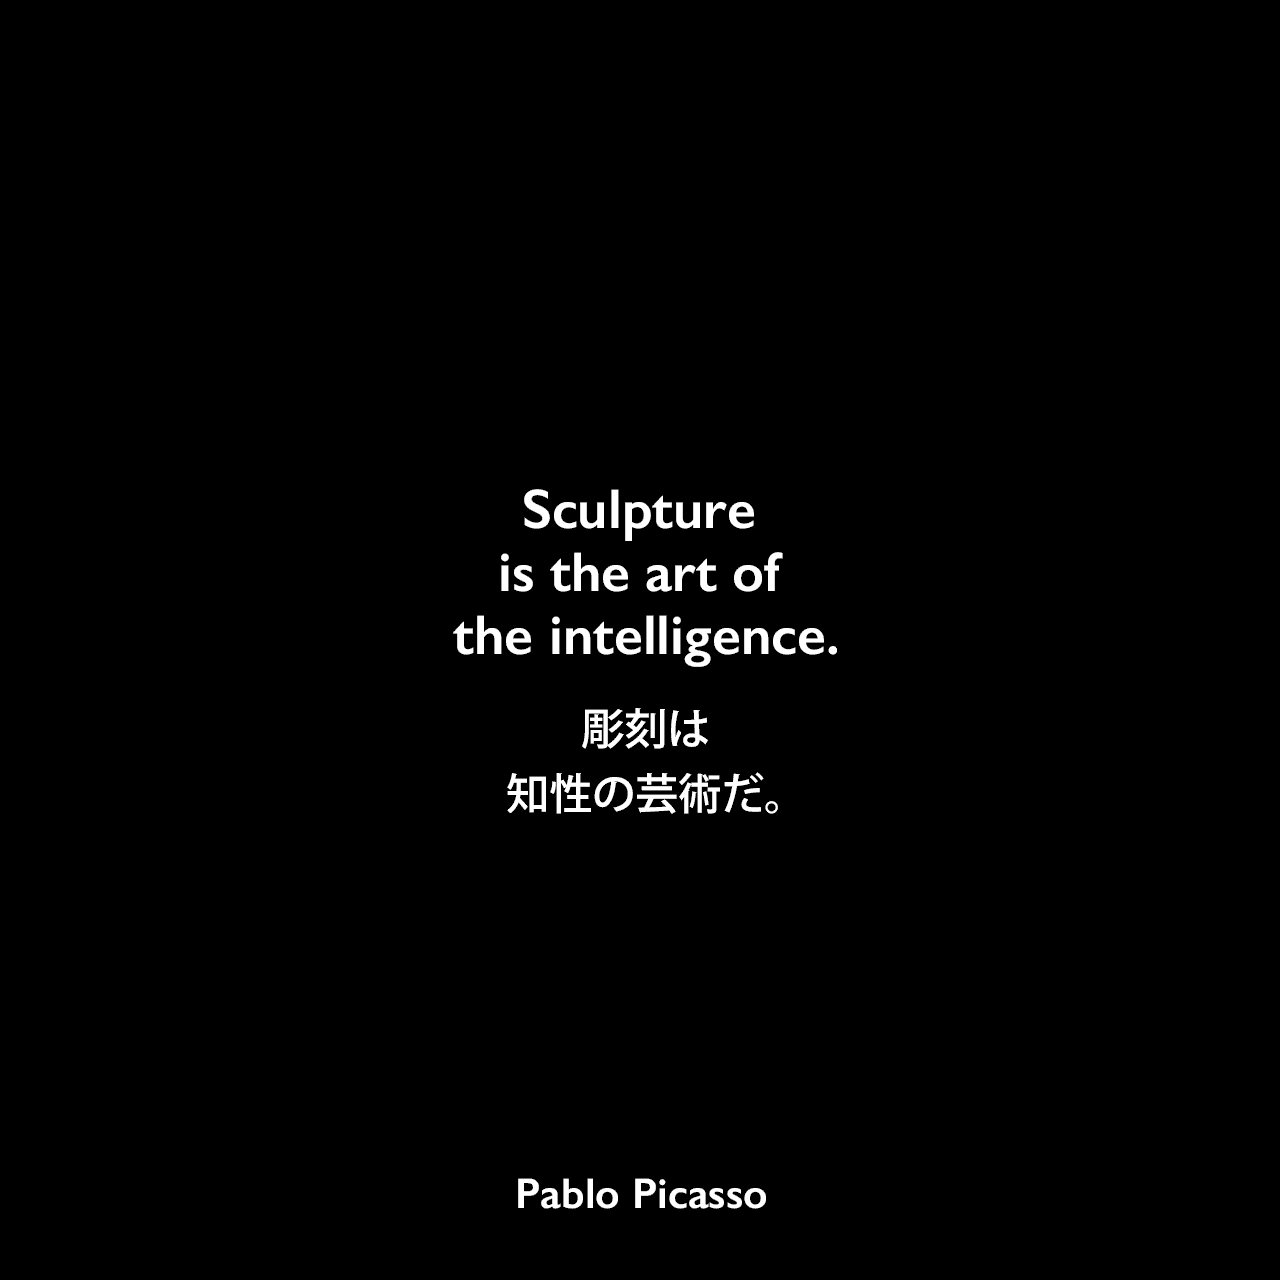 Sculpture is the art of the intelligence.彫刻は知性の芸術だ。Pablo Picasso